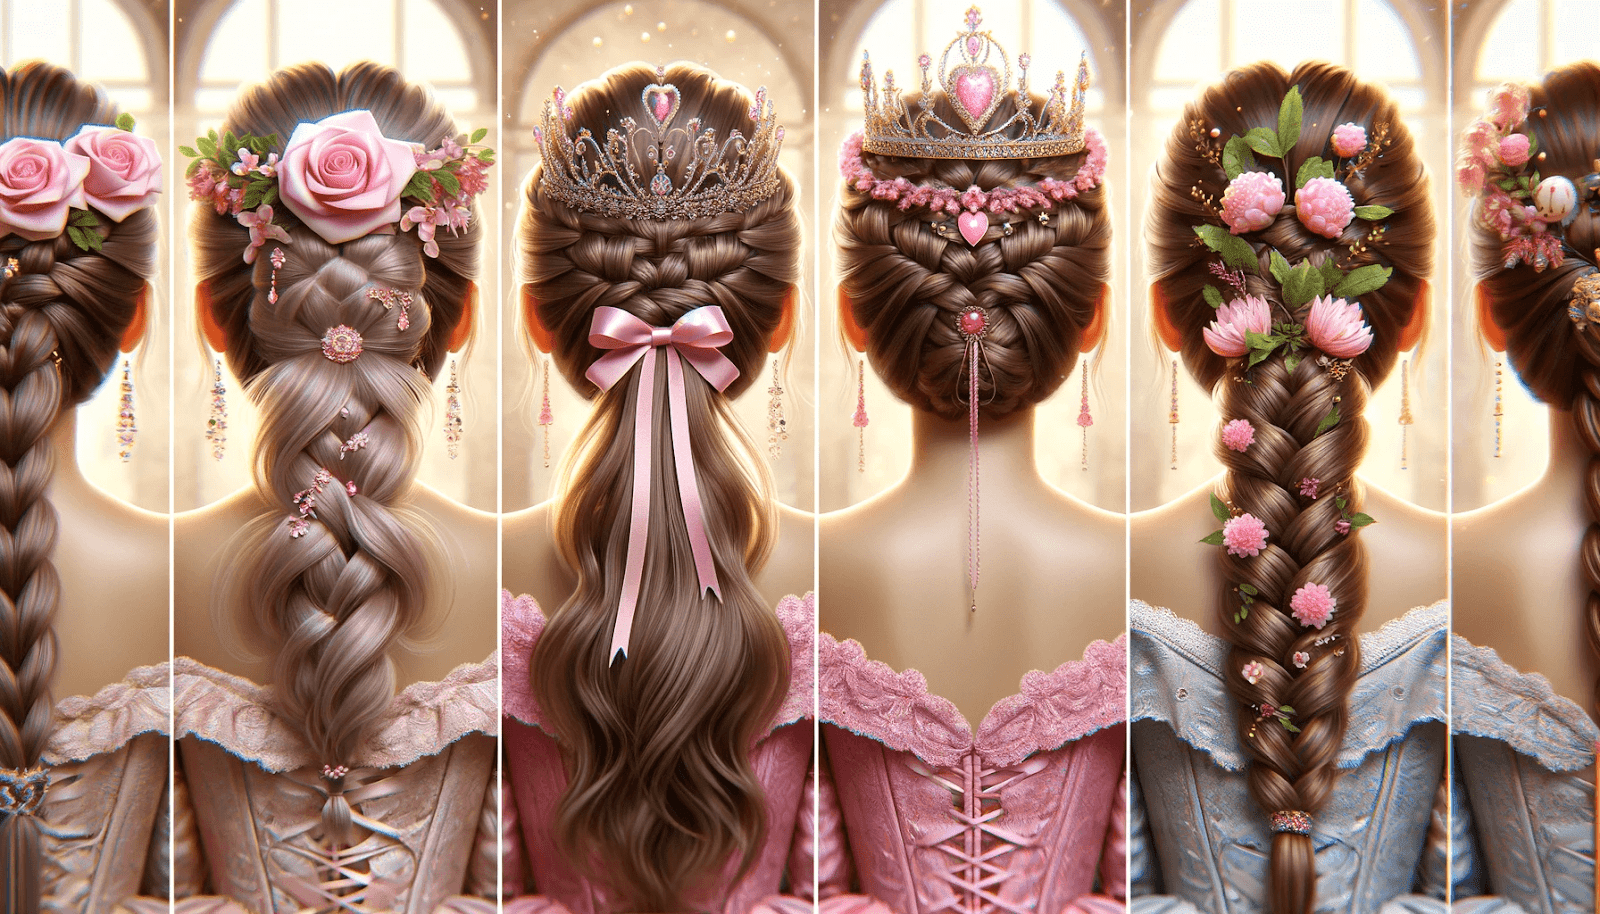 A Quinceanera tradition hairstyle with a collage of different hairs adorned with flowers